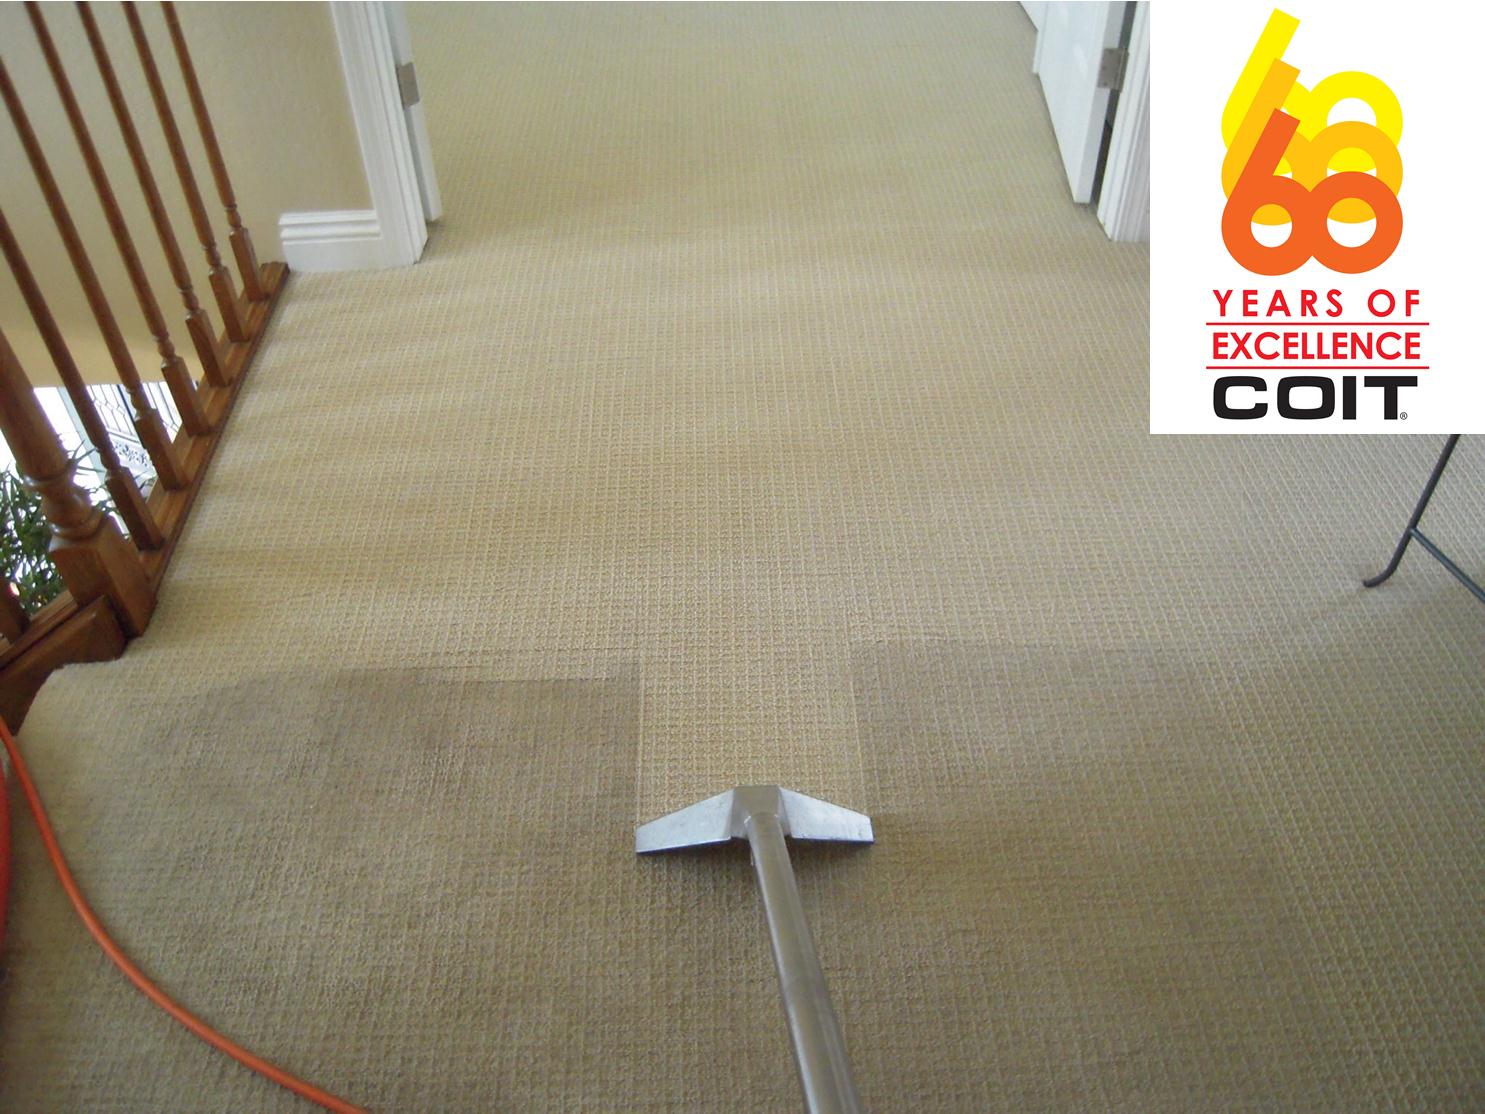 Deal 120 For Carpet Cleaning Of 4 Rooms With Coit 50 Off 240 Value Certifikid